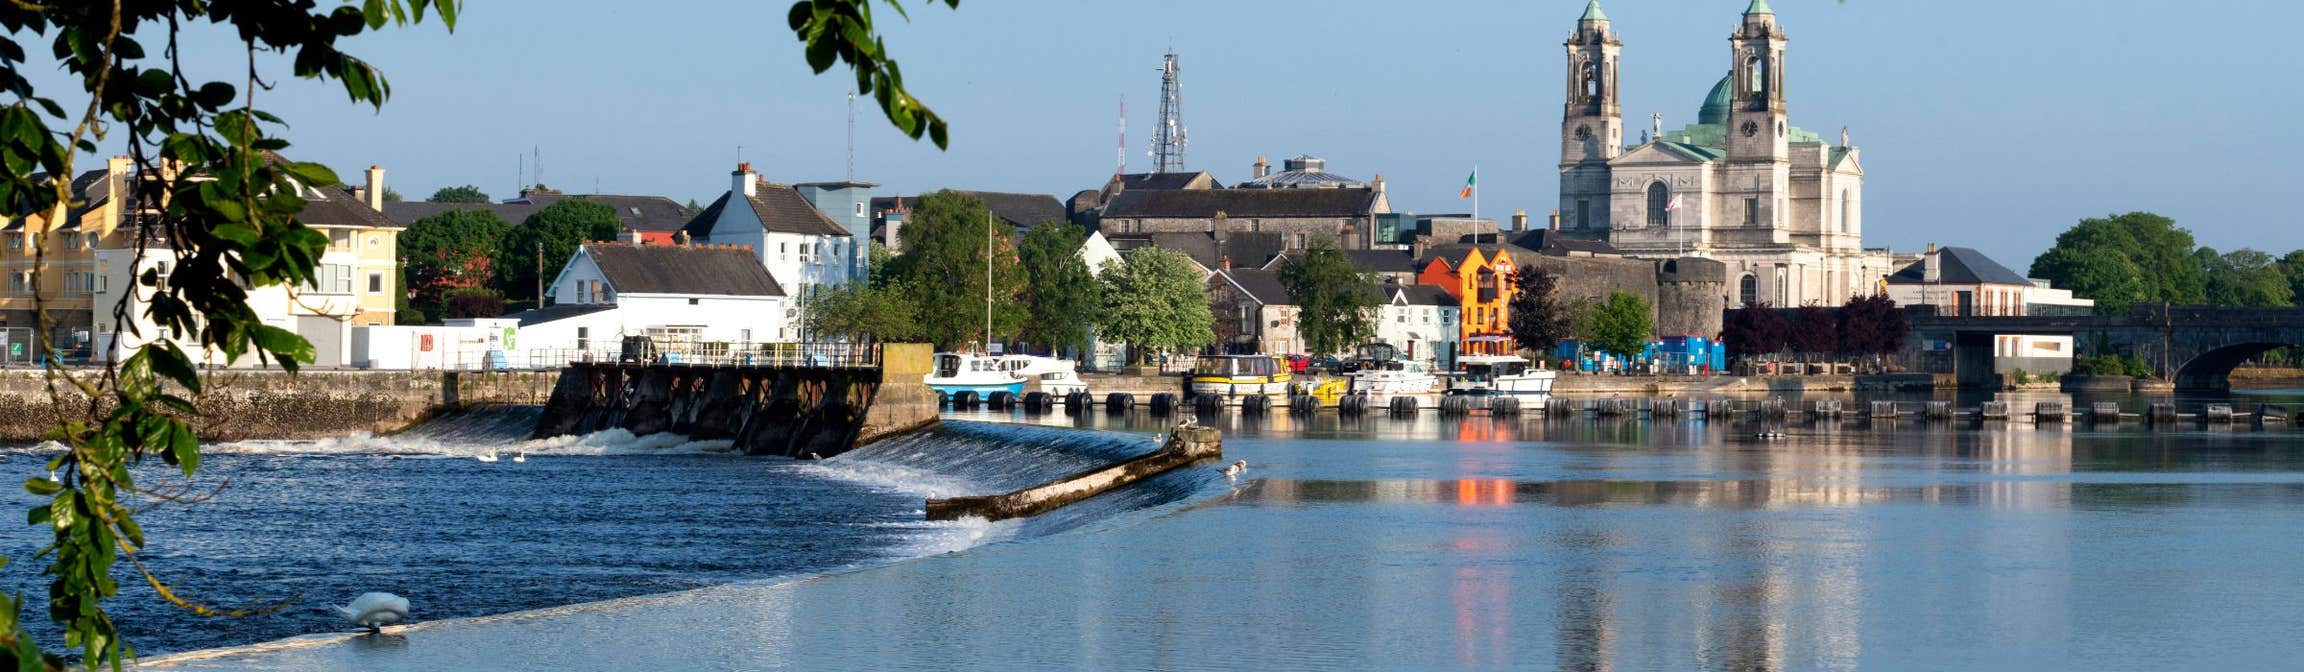 Image of Athlone in County Westmeath